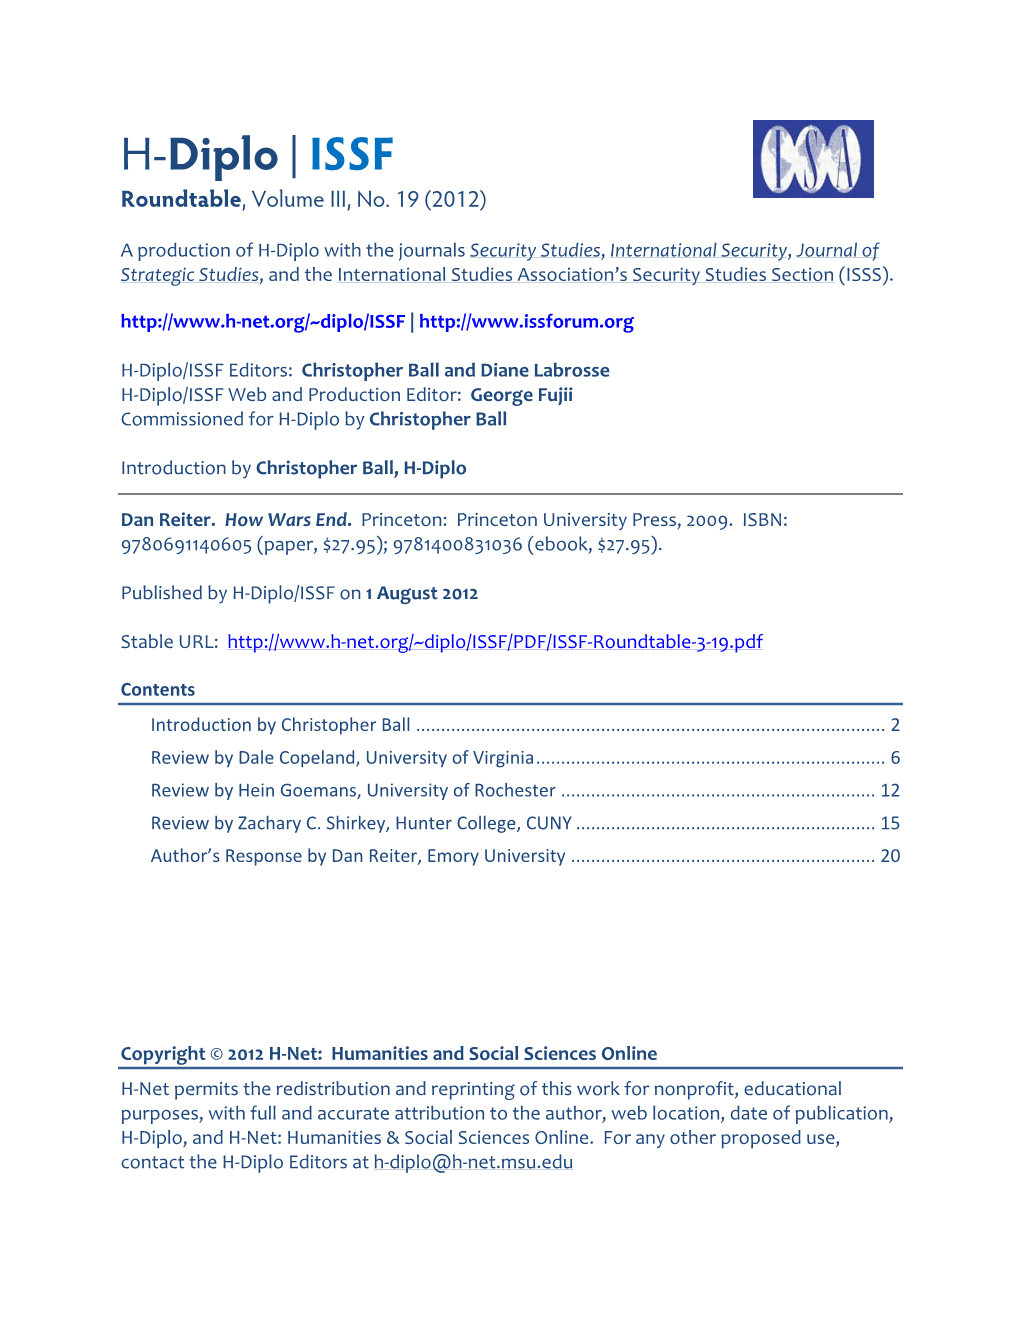 H-Diplo/ISSF Roundtable, Vol. 3, No. 19 (2012)